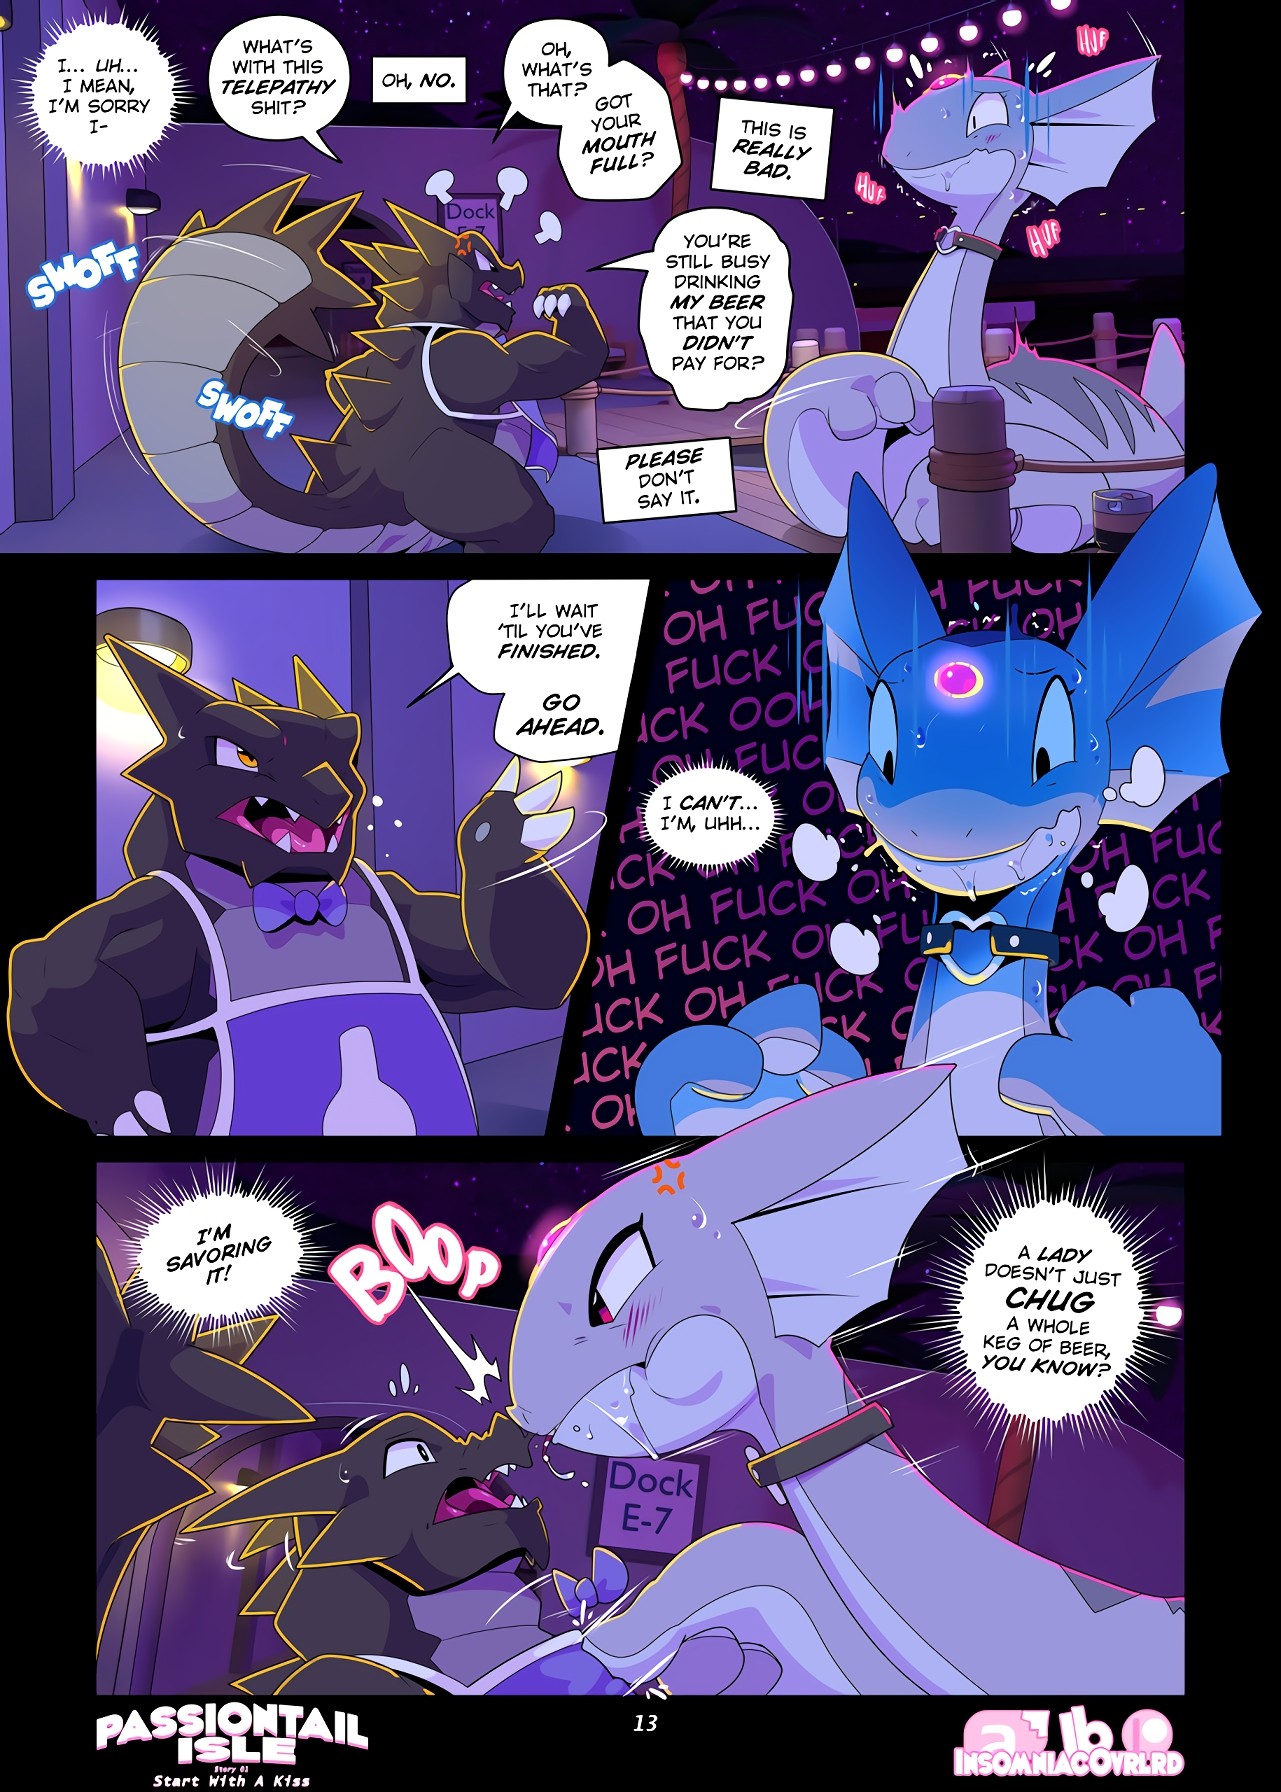 Absol Porn Comic - Passiontail Isle by Insomniacovrlrd Animated porn comic, Rule 34 comic,  Cartoon porn comic - GOLDENCOMICS